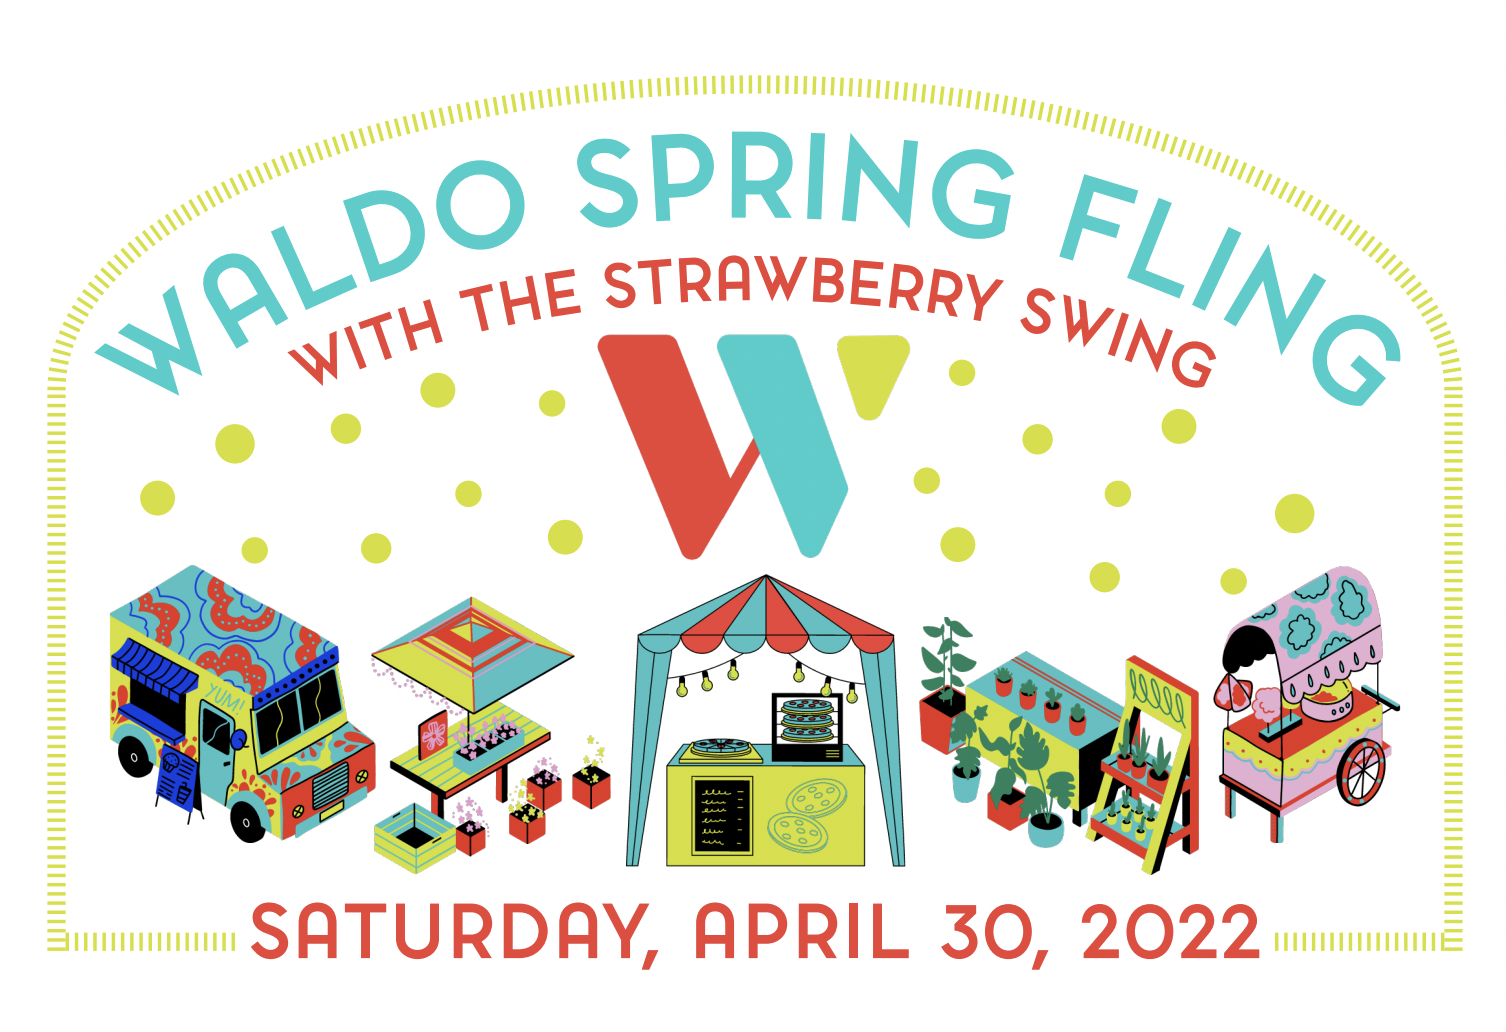 Join us for the inaugural Waldo Spring Fling with The Strawberry Swing